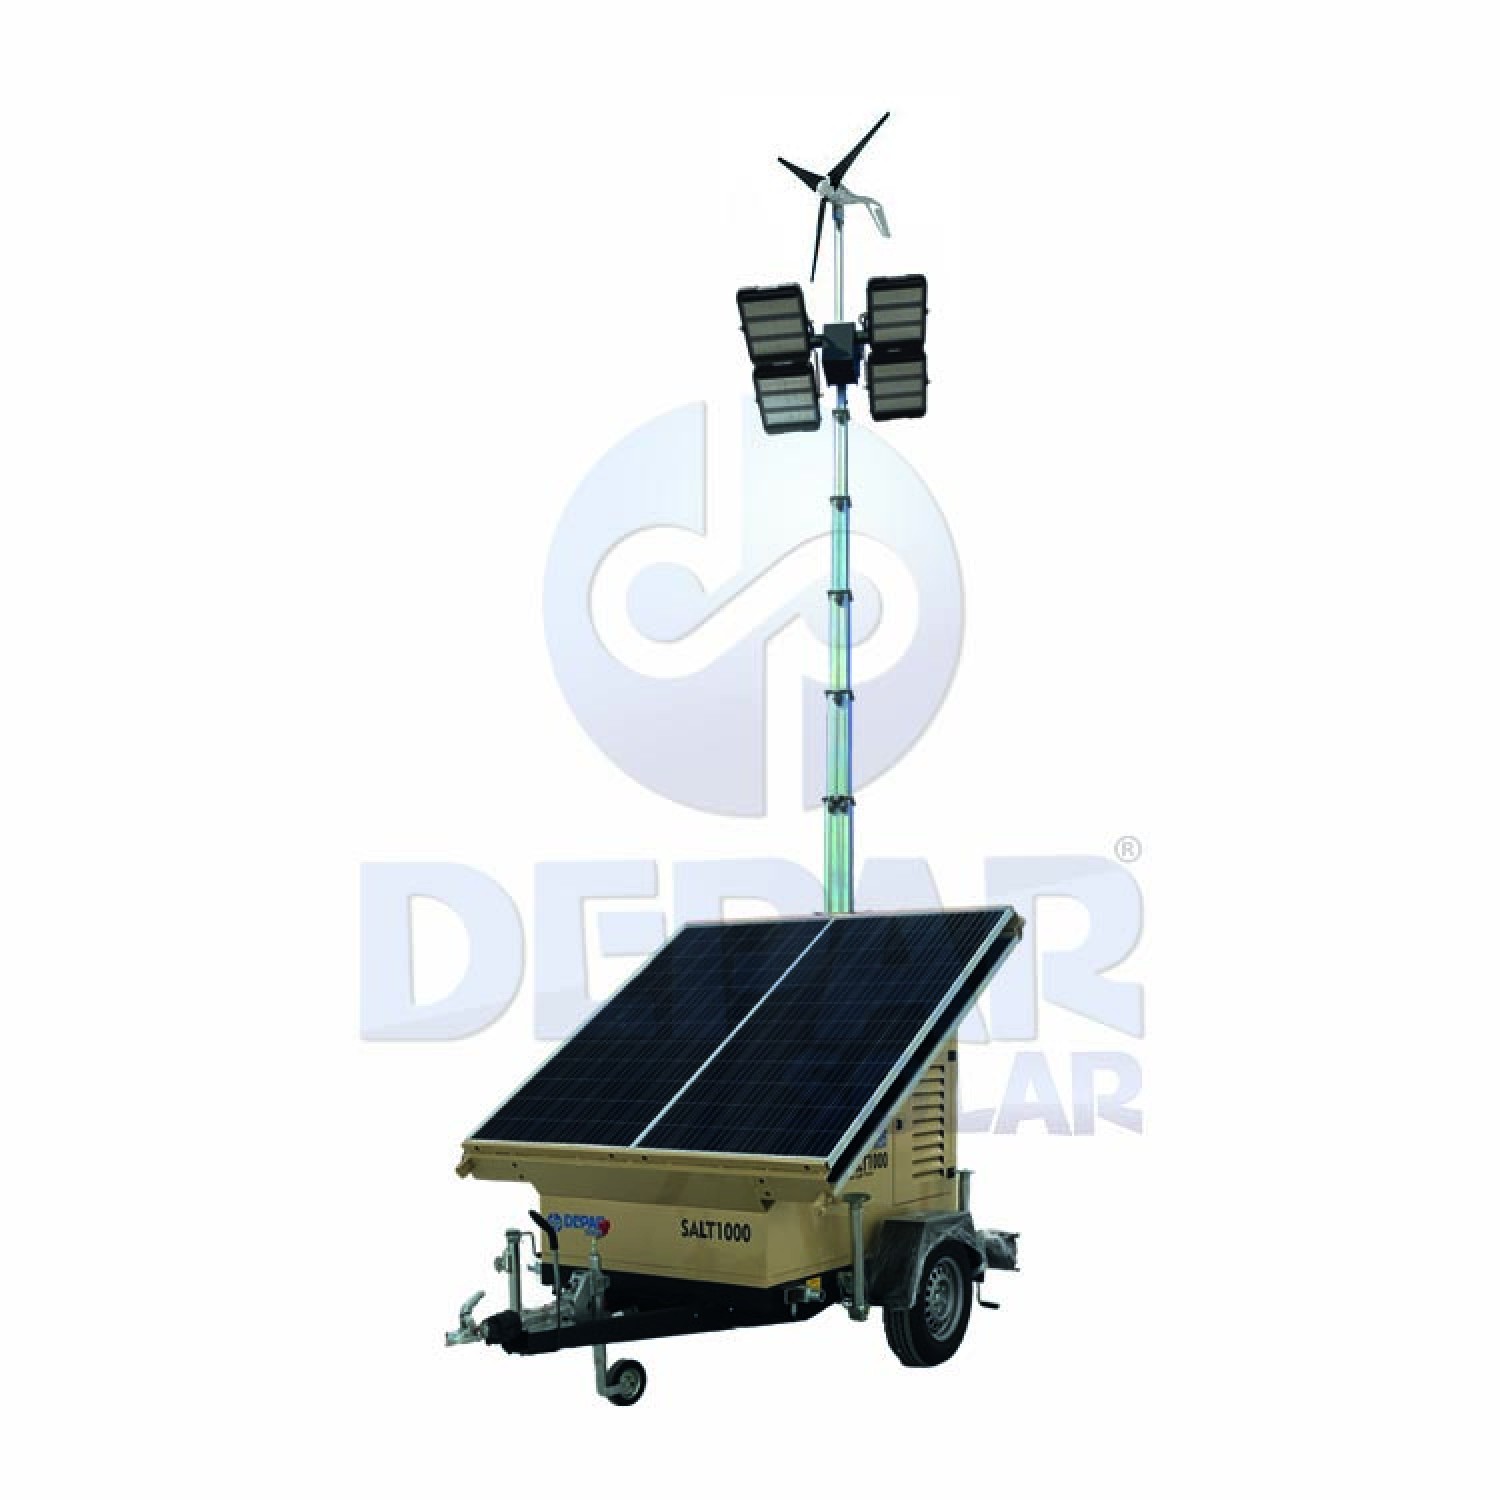 SALT1400 SERIES 1400W Solar Light Tower with Wind Assisted